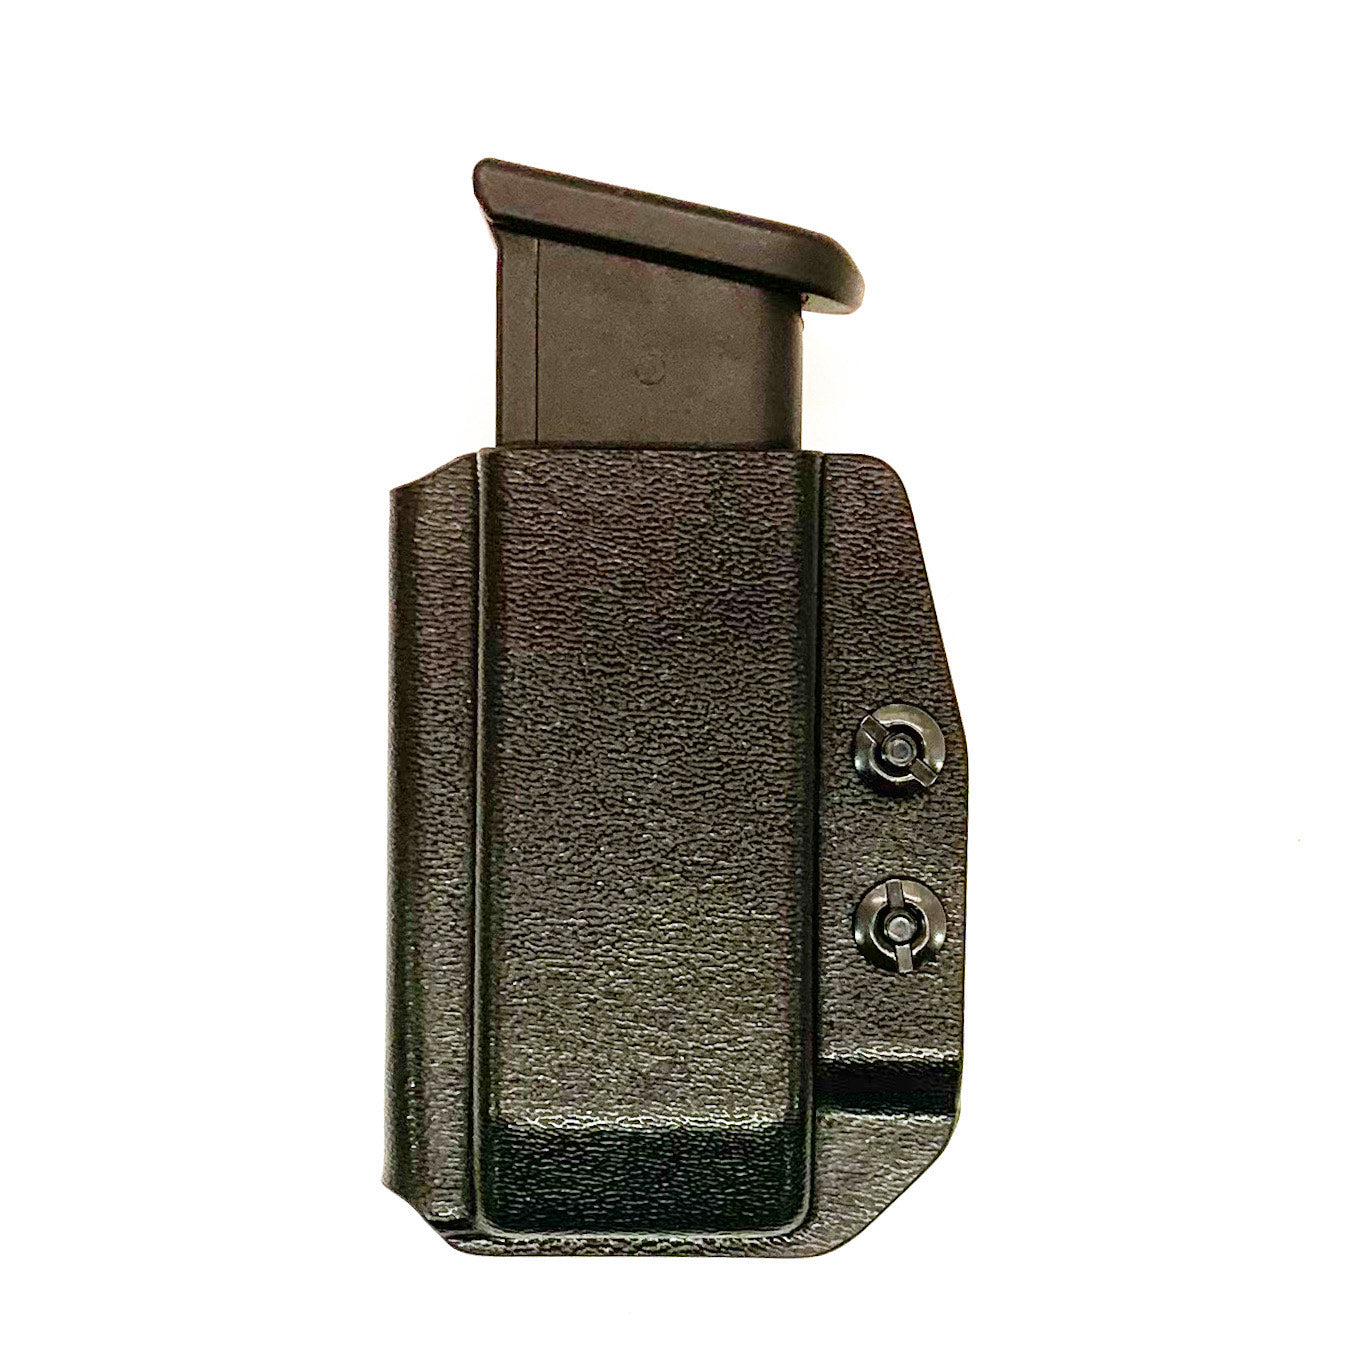 For the best, Inside Waistband IWB AIWB Glock 17, 17L, 19, 22, 23, 26, 27, 34, 35, 45, 31, 32, 33 magazine carrier, holster, & pouch for the Sig P320, P365, P365XL, .357 Sig, 9mm & 40 Walther, Smith & Wesson, Arex, H&K, and 509, 509T, LS EDGE FN magazines, shop Four Brothers Holsters. 4BROS, Made in the USA